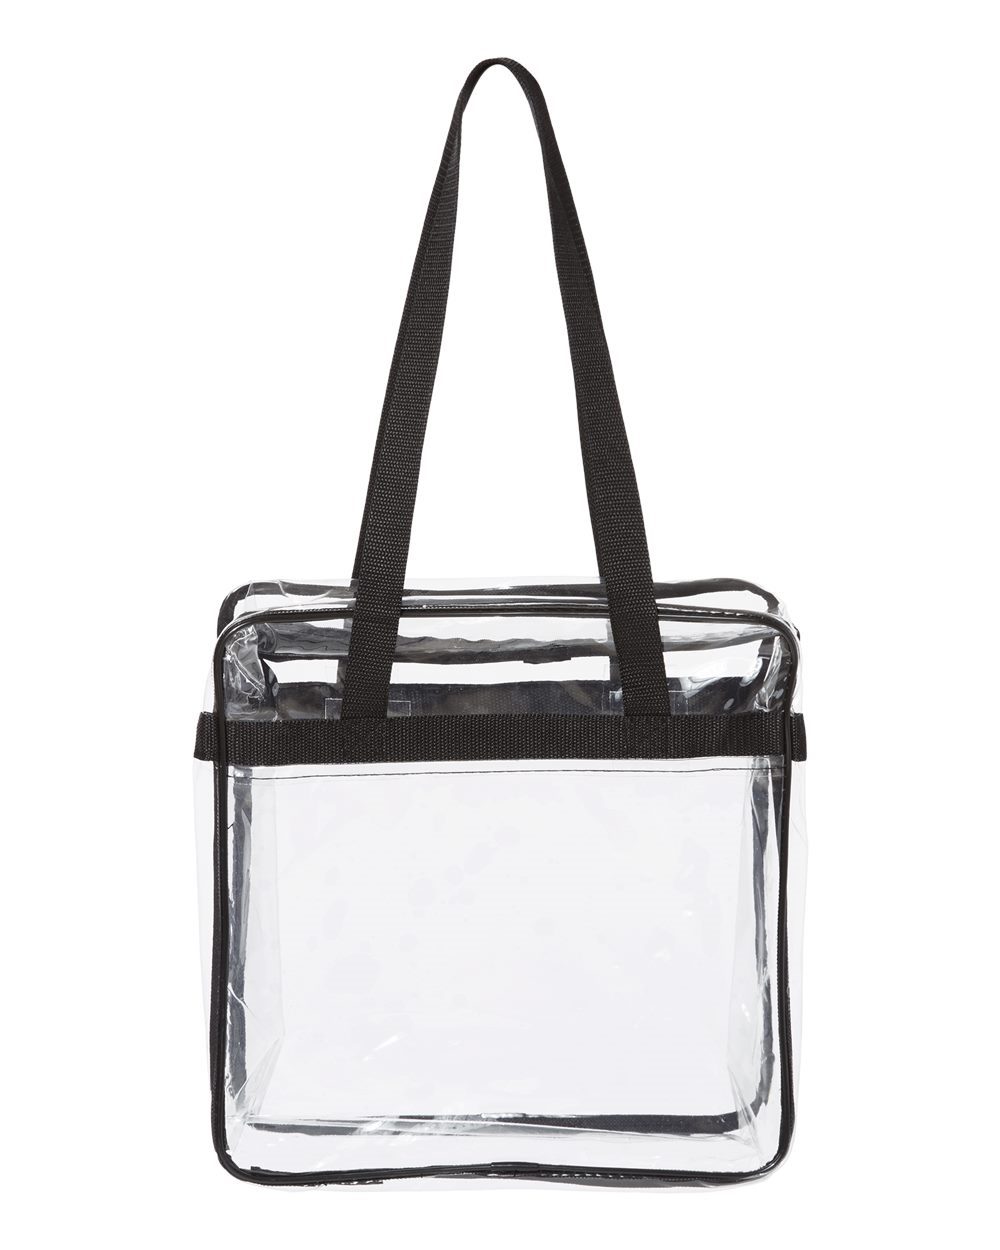 OAD&#xAE; - Clear Tote with Zippered Top - Optimize Your Style Statement 100% Double-Polished PVC